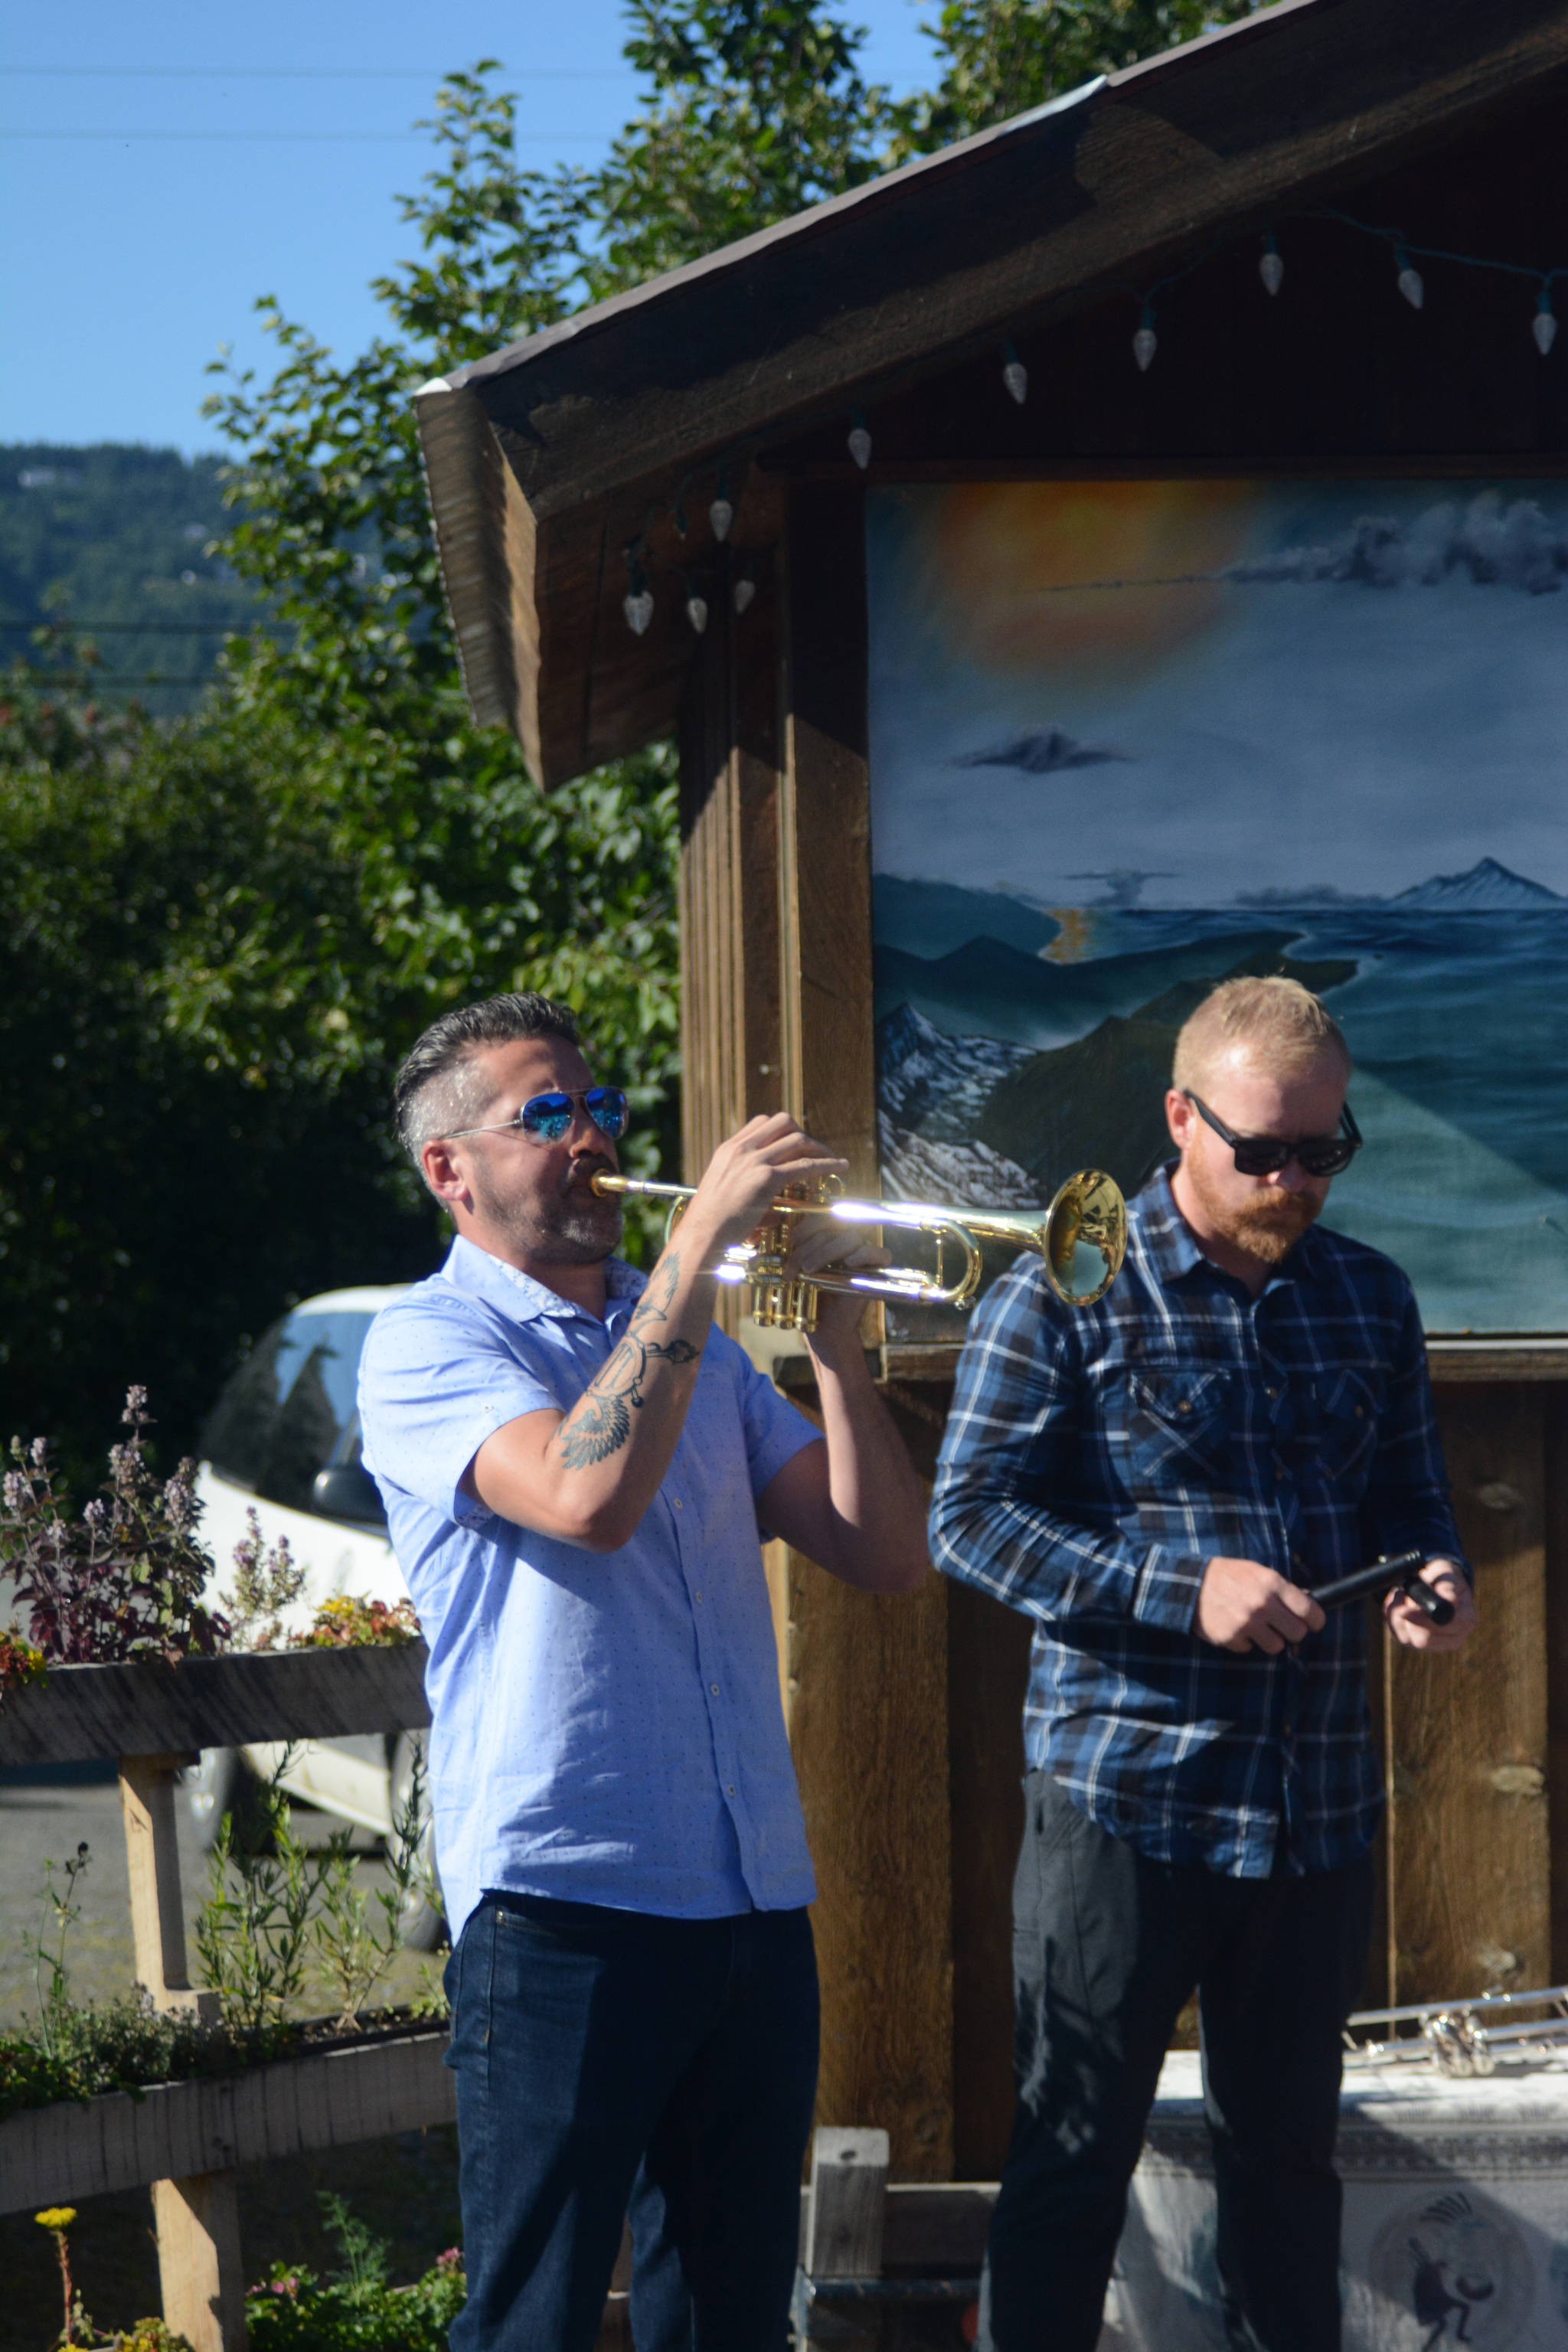 Shane Jonas, left, and Sam Johnson, right, of the LowDown Brass Band perform an impromptu session Tuesday Aug. 7, 2018 at the Homer Brewery in Homer, Alaska. The band played at Salmonfest on Saturday, at Alice’s Champagne Palace on Tuesday and at Soldotna Creek Park on Wednesday. (Photo by Michael Armstrong/Homer News)